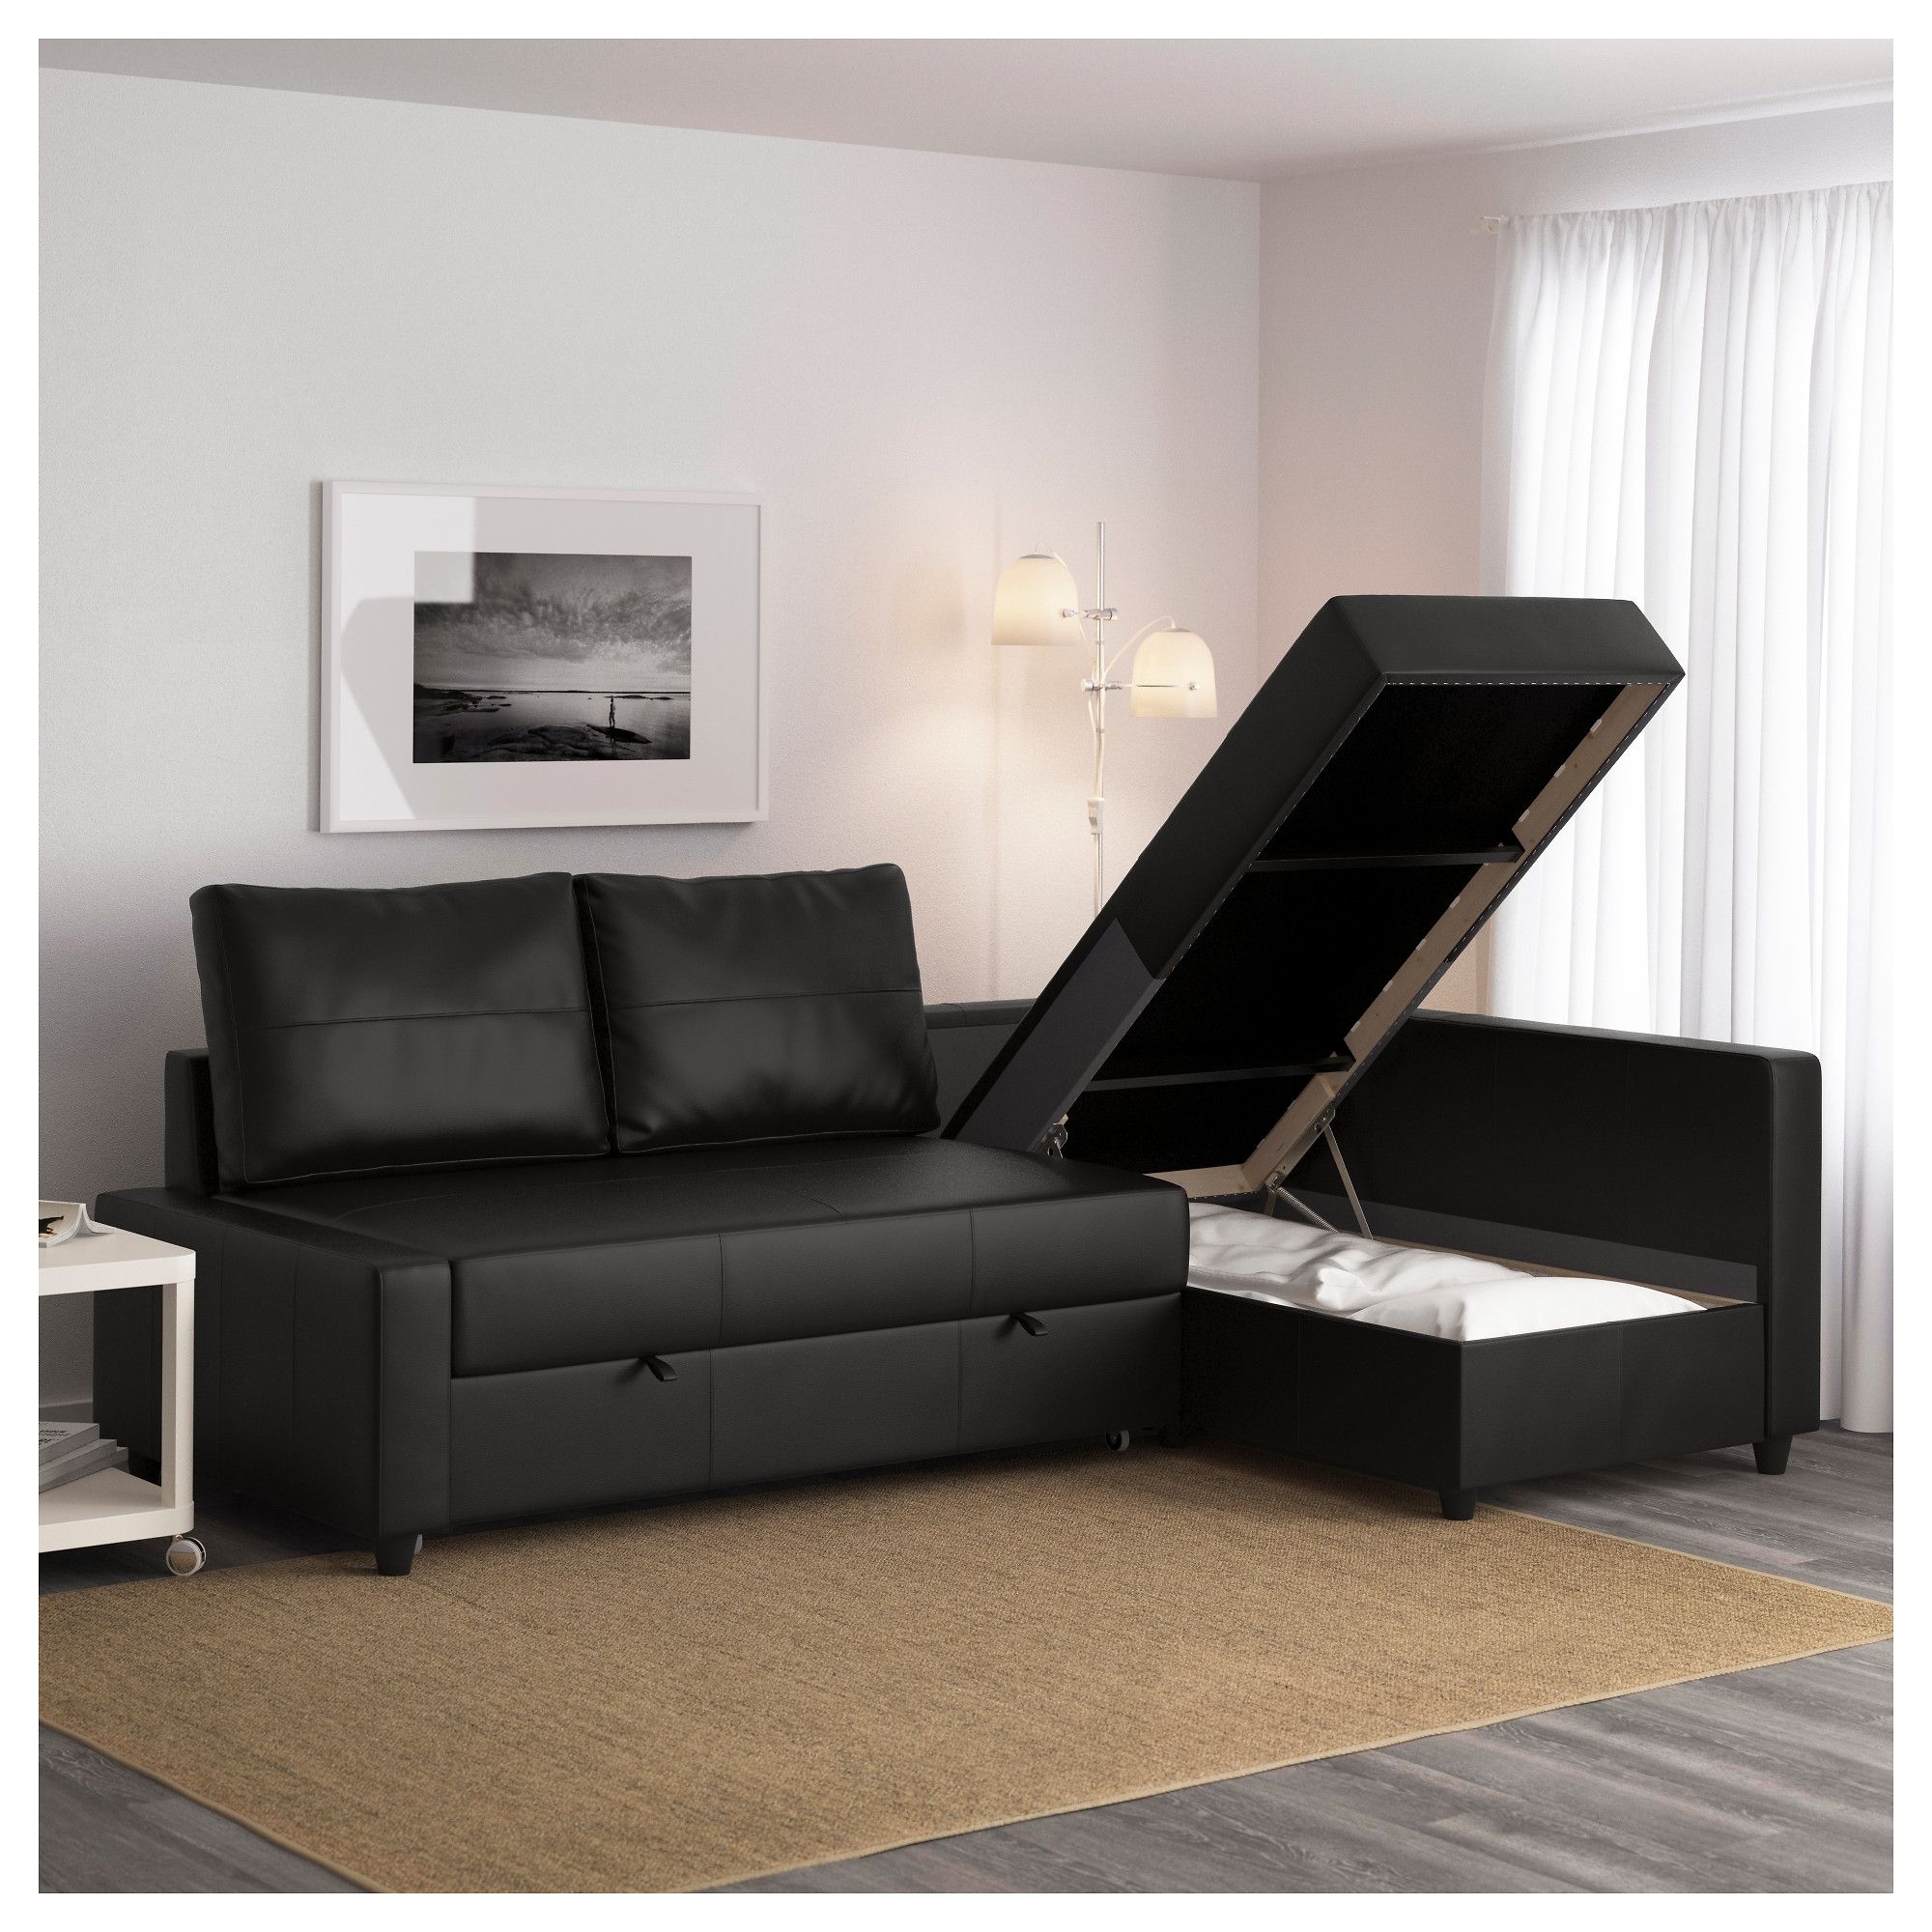 Most Recent Friheten Sleeper Sectional,3 Seat W/storage – Skiftebo Dark Gray Intended For Storage Sofas (Gallery 2 of 20)